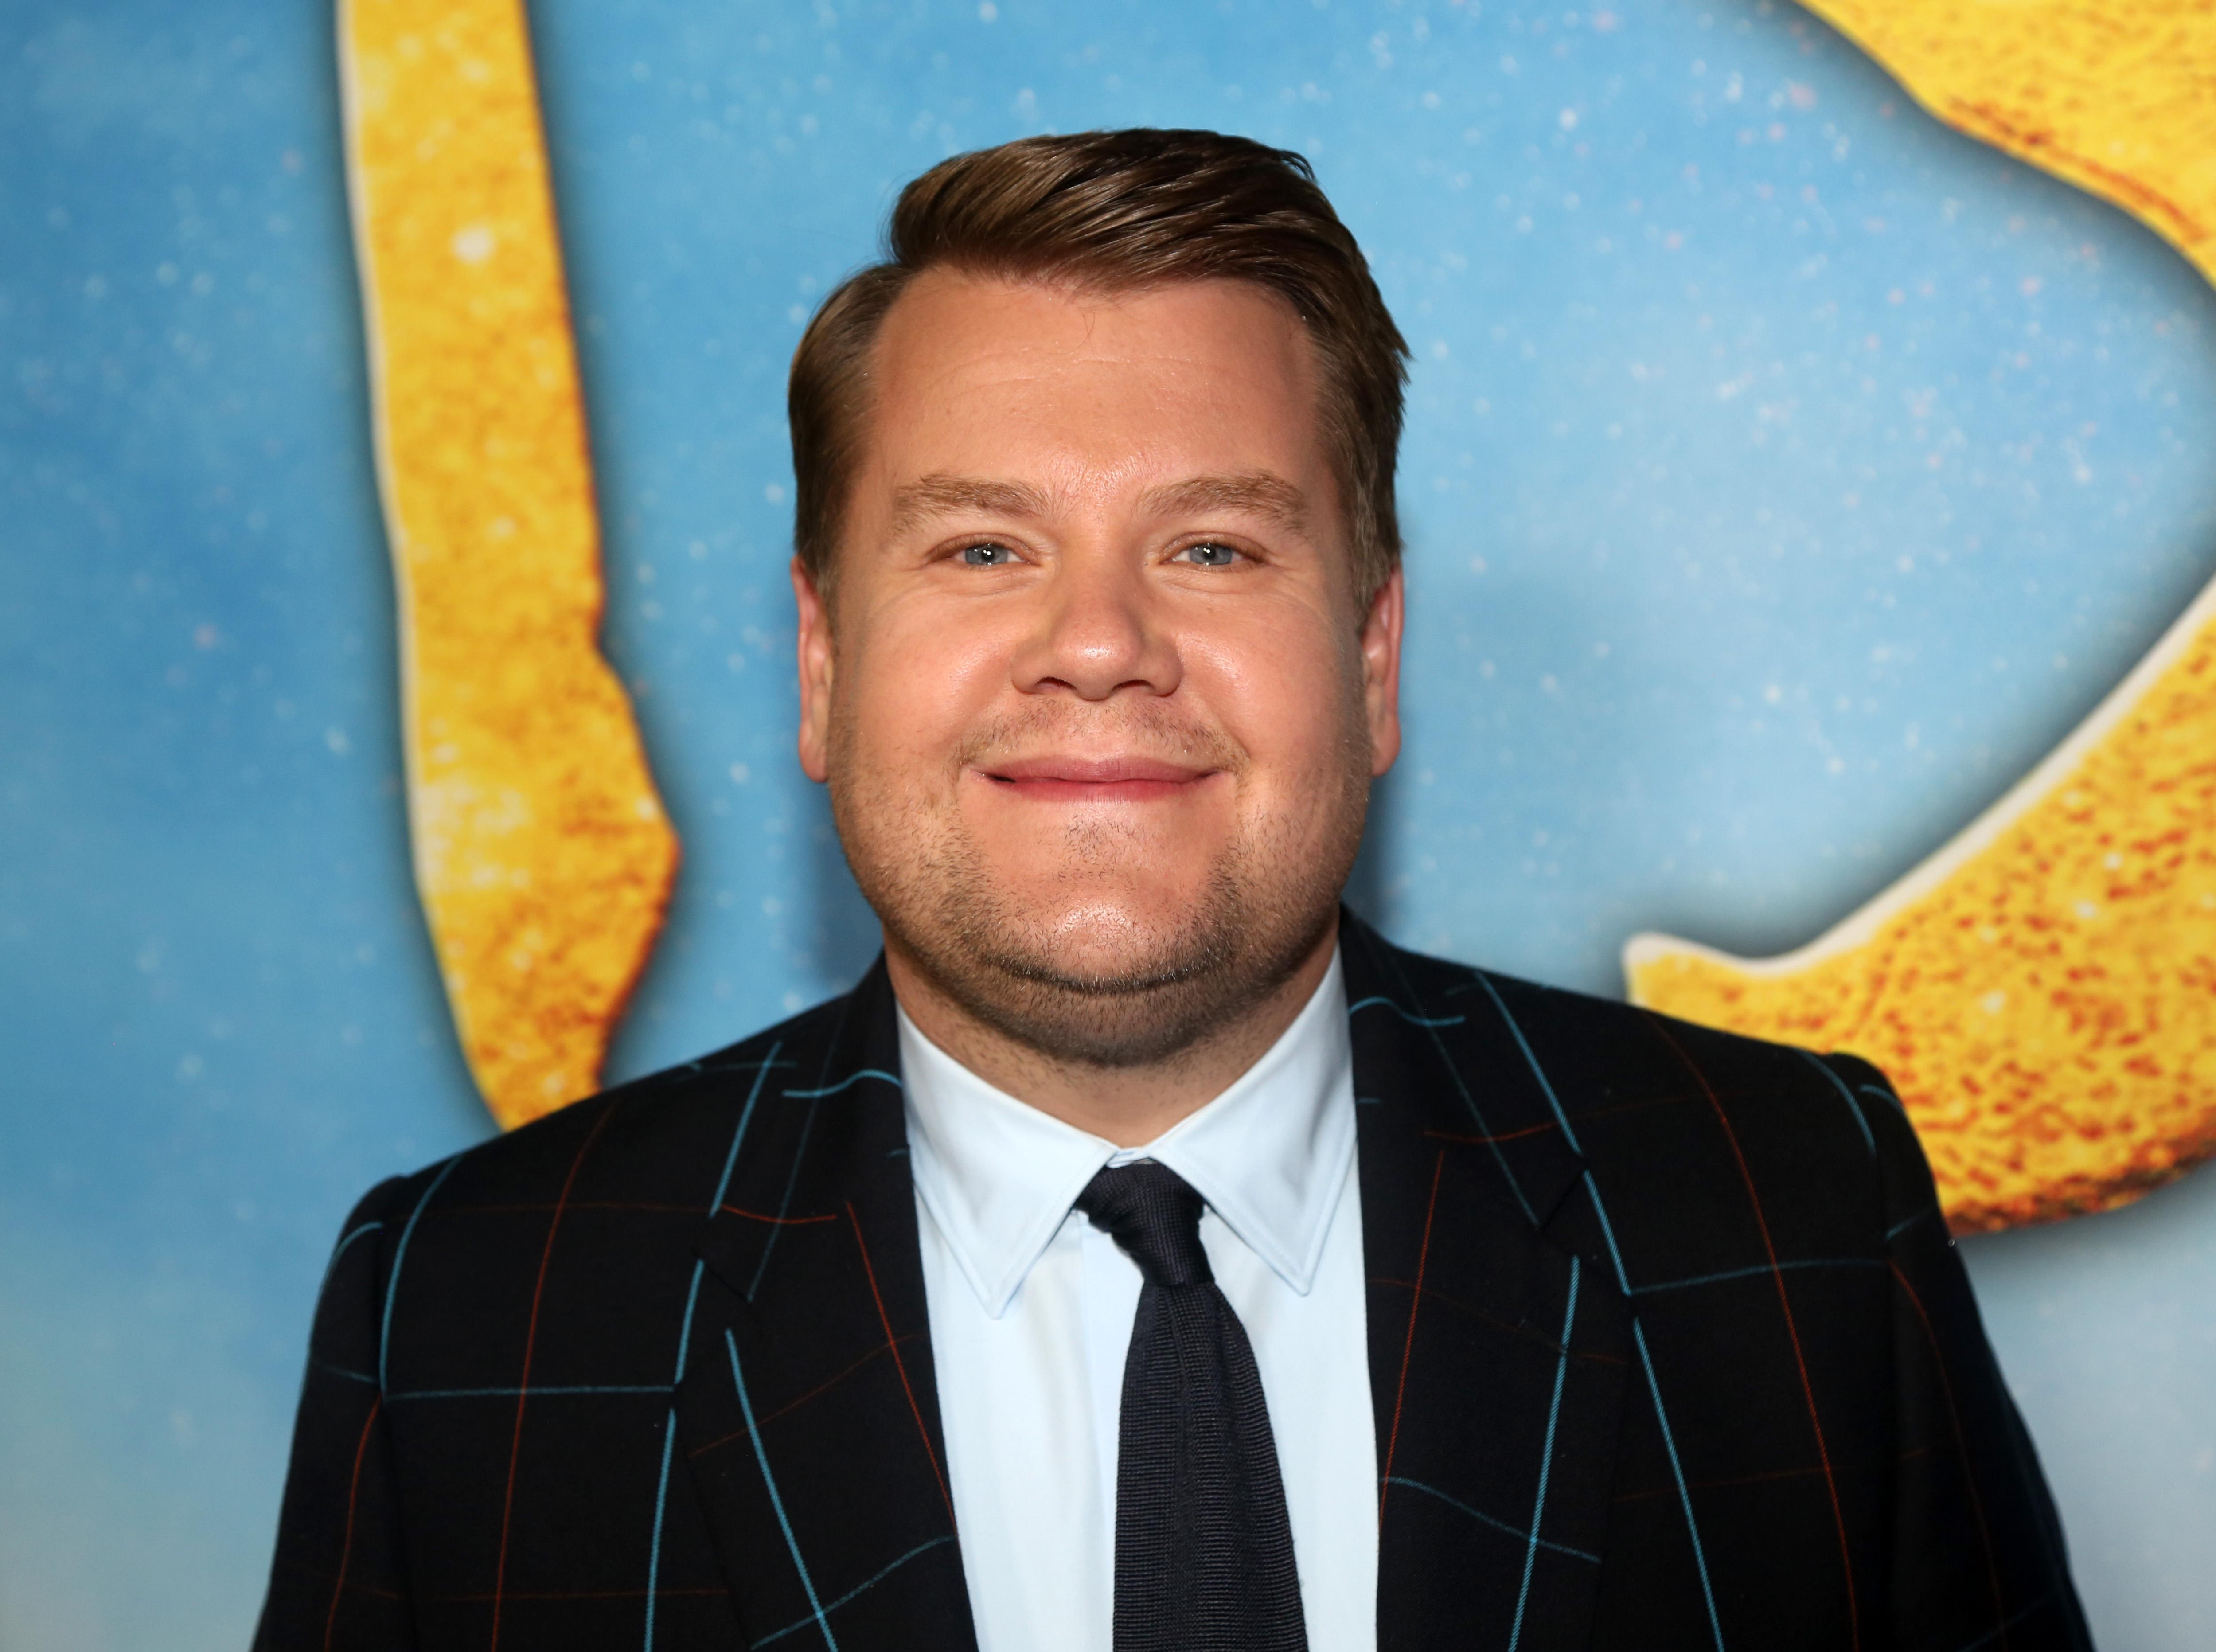 James Corden Reveals The RUDEST Celeb He’s Ever Met: ‘Just Pushed Me Out The Way’